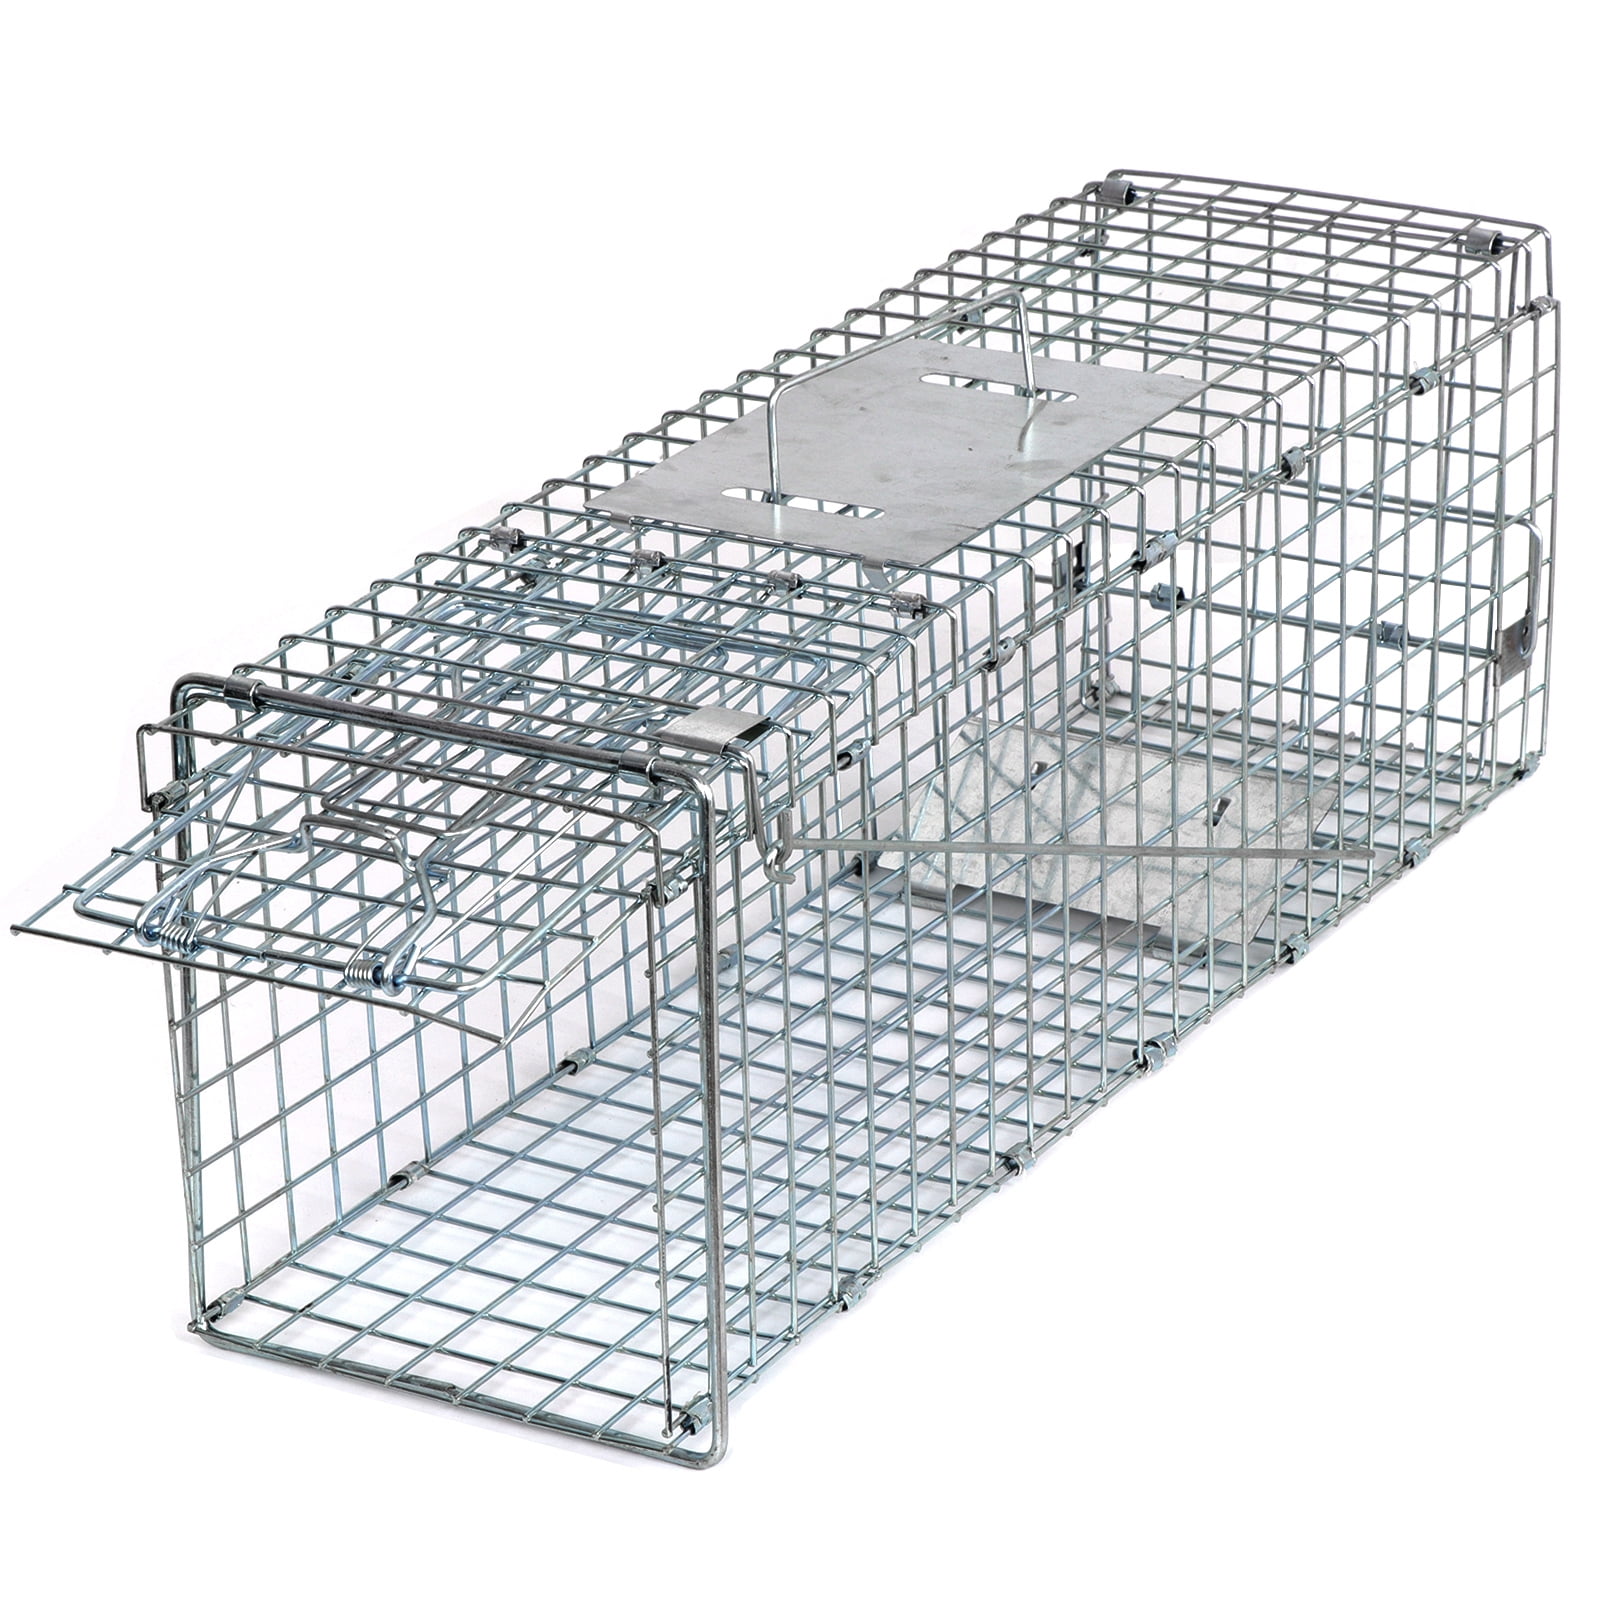 Live Animal Trap Extra Large Rodent Cage 24"X8"X 7.5" Garden Rabbit Raccoon Cat 